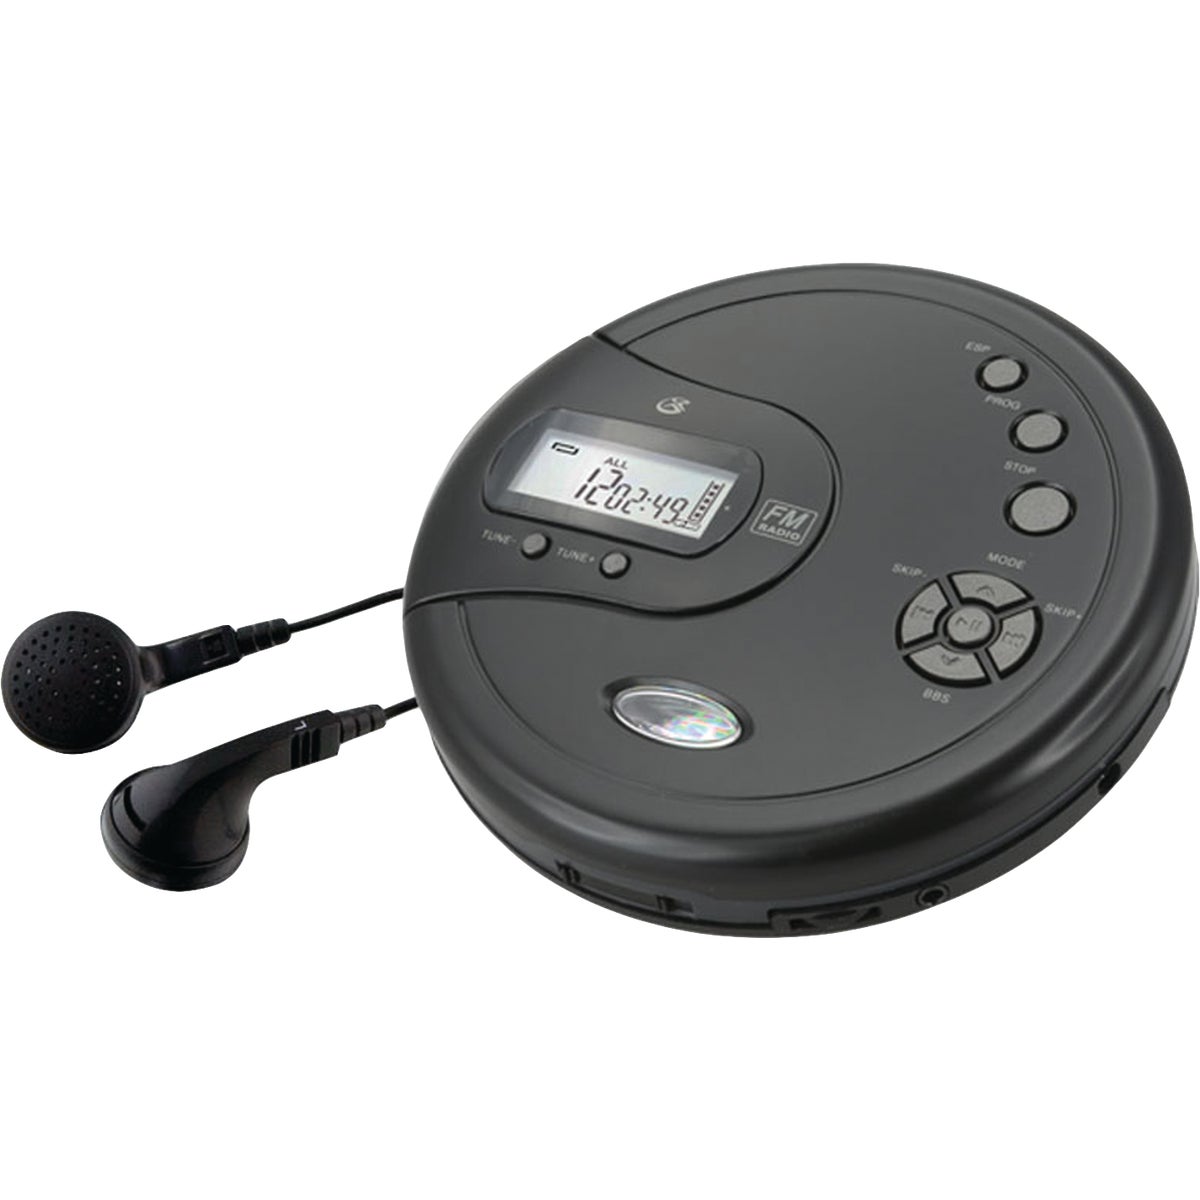 Item 653000, Portable CD player allows you to listen to your favorite CDs and FM radio 